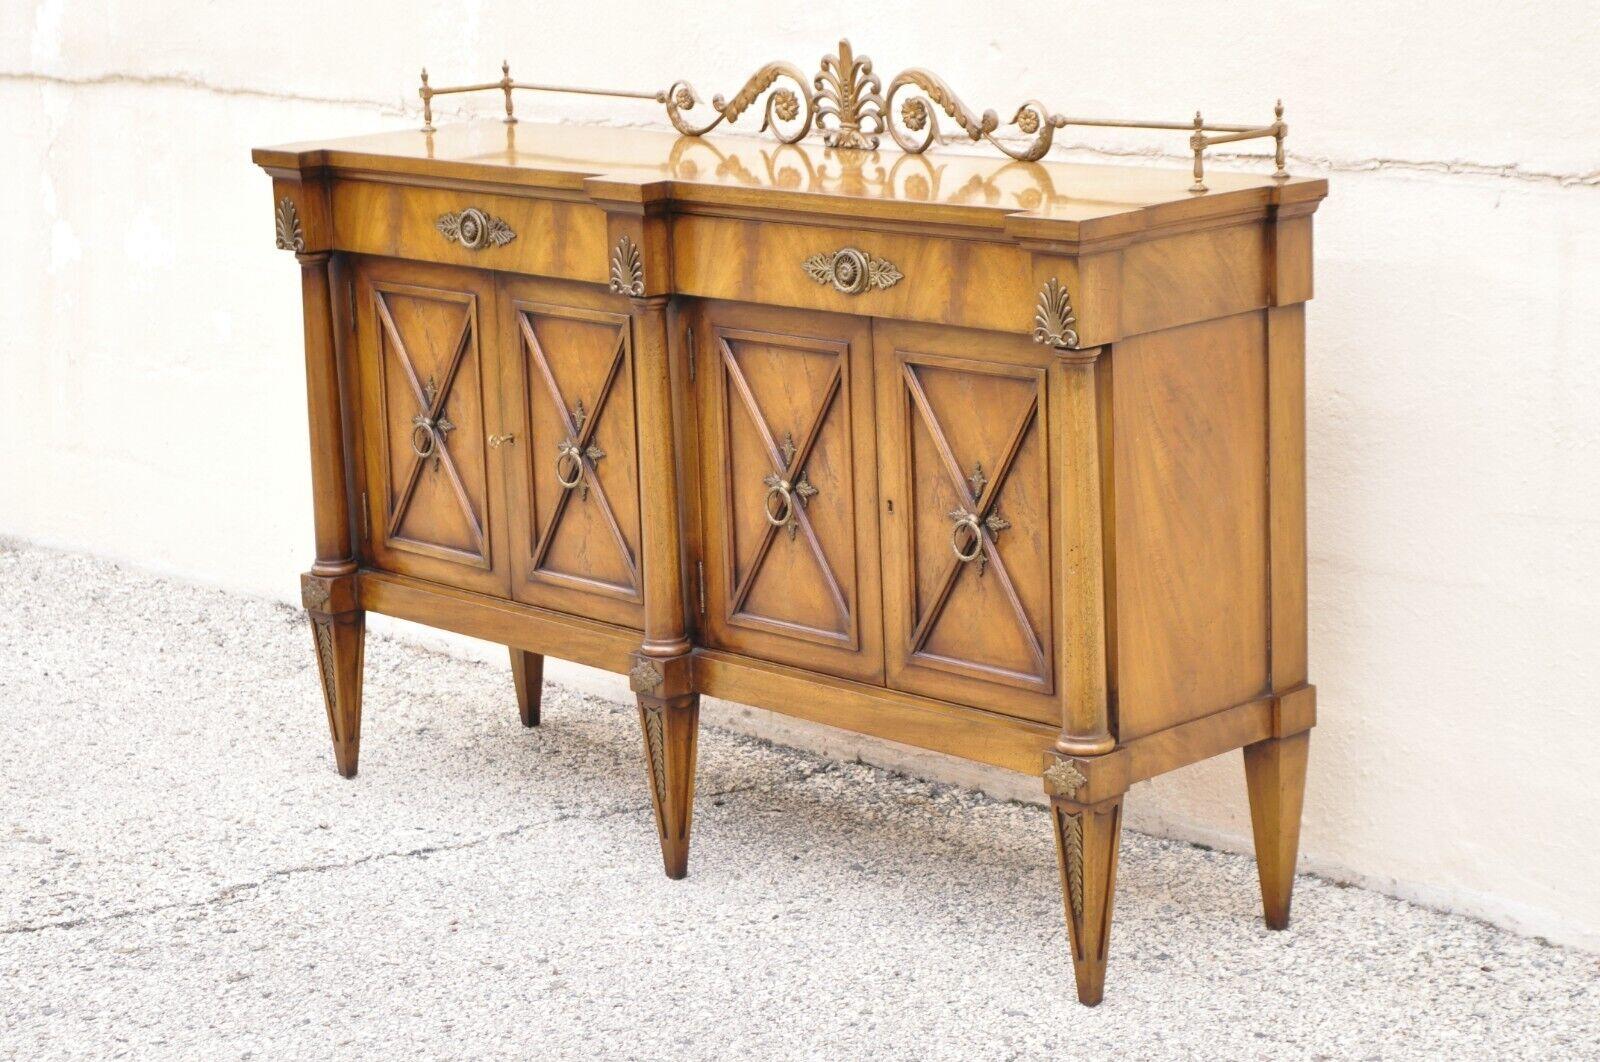 Karges Neoclassical Regency style mahogany sideboard buffet with brass ormolu. Item features a tall metal gallery, carved x-form door fronts, brass ormolu, carved column supports, 4 swing doors, 2 wooden shelves, tapered legs, matching cabinets